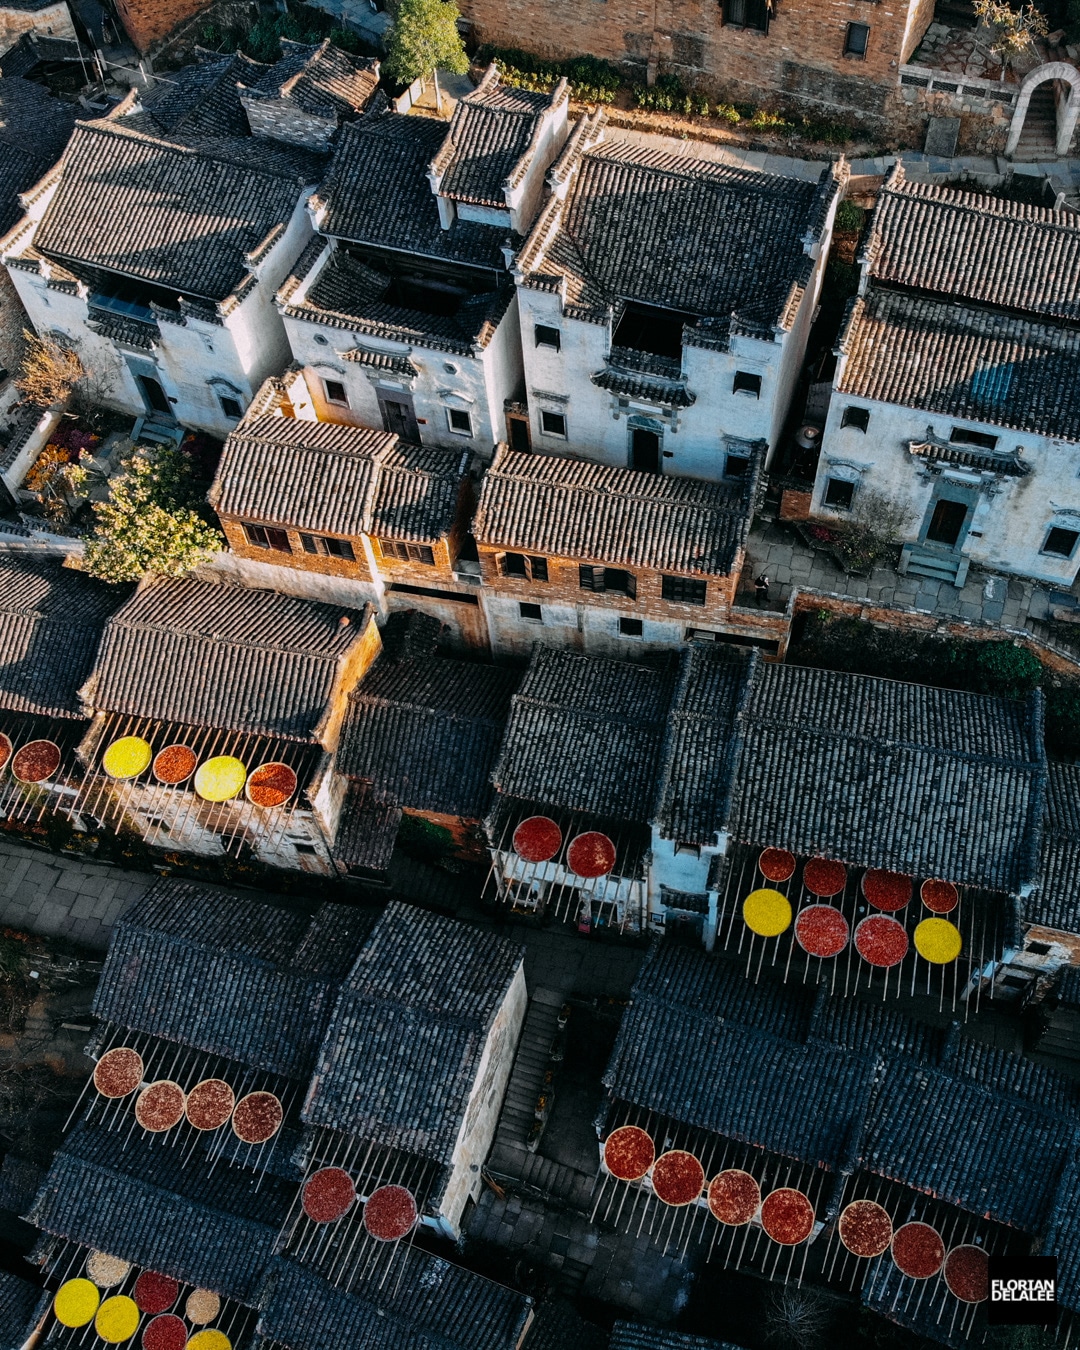 Drone Photo of Homes in China